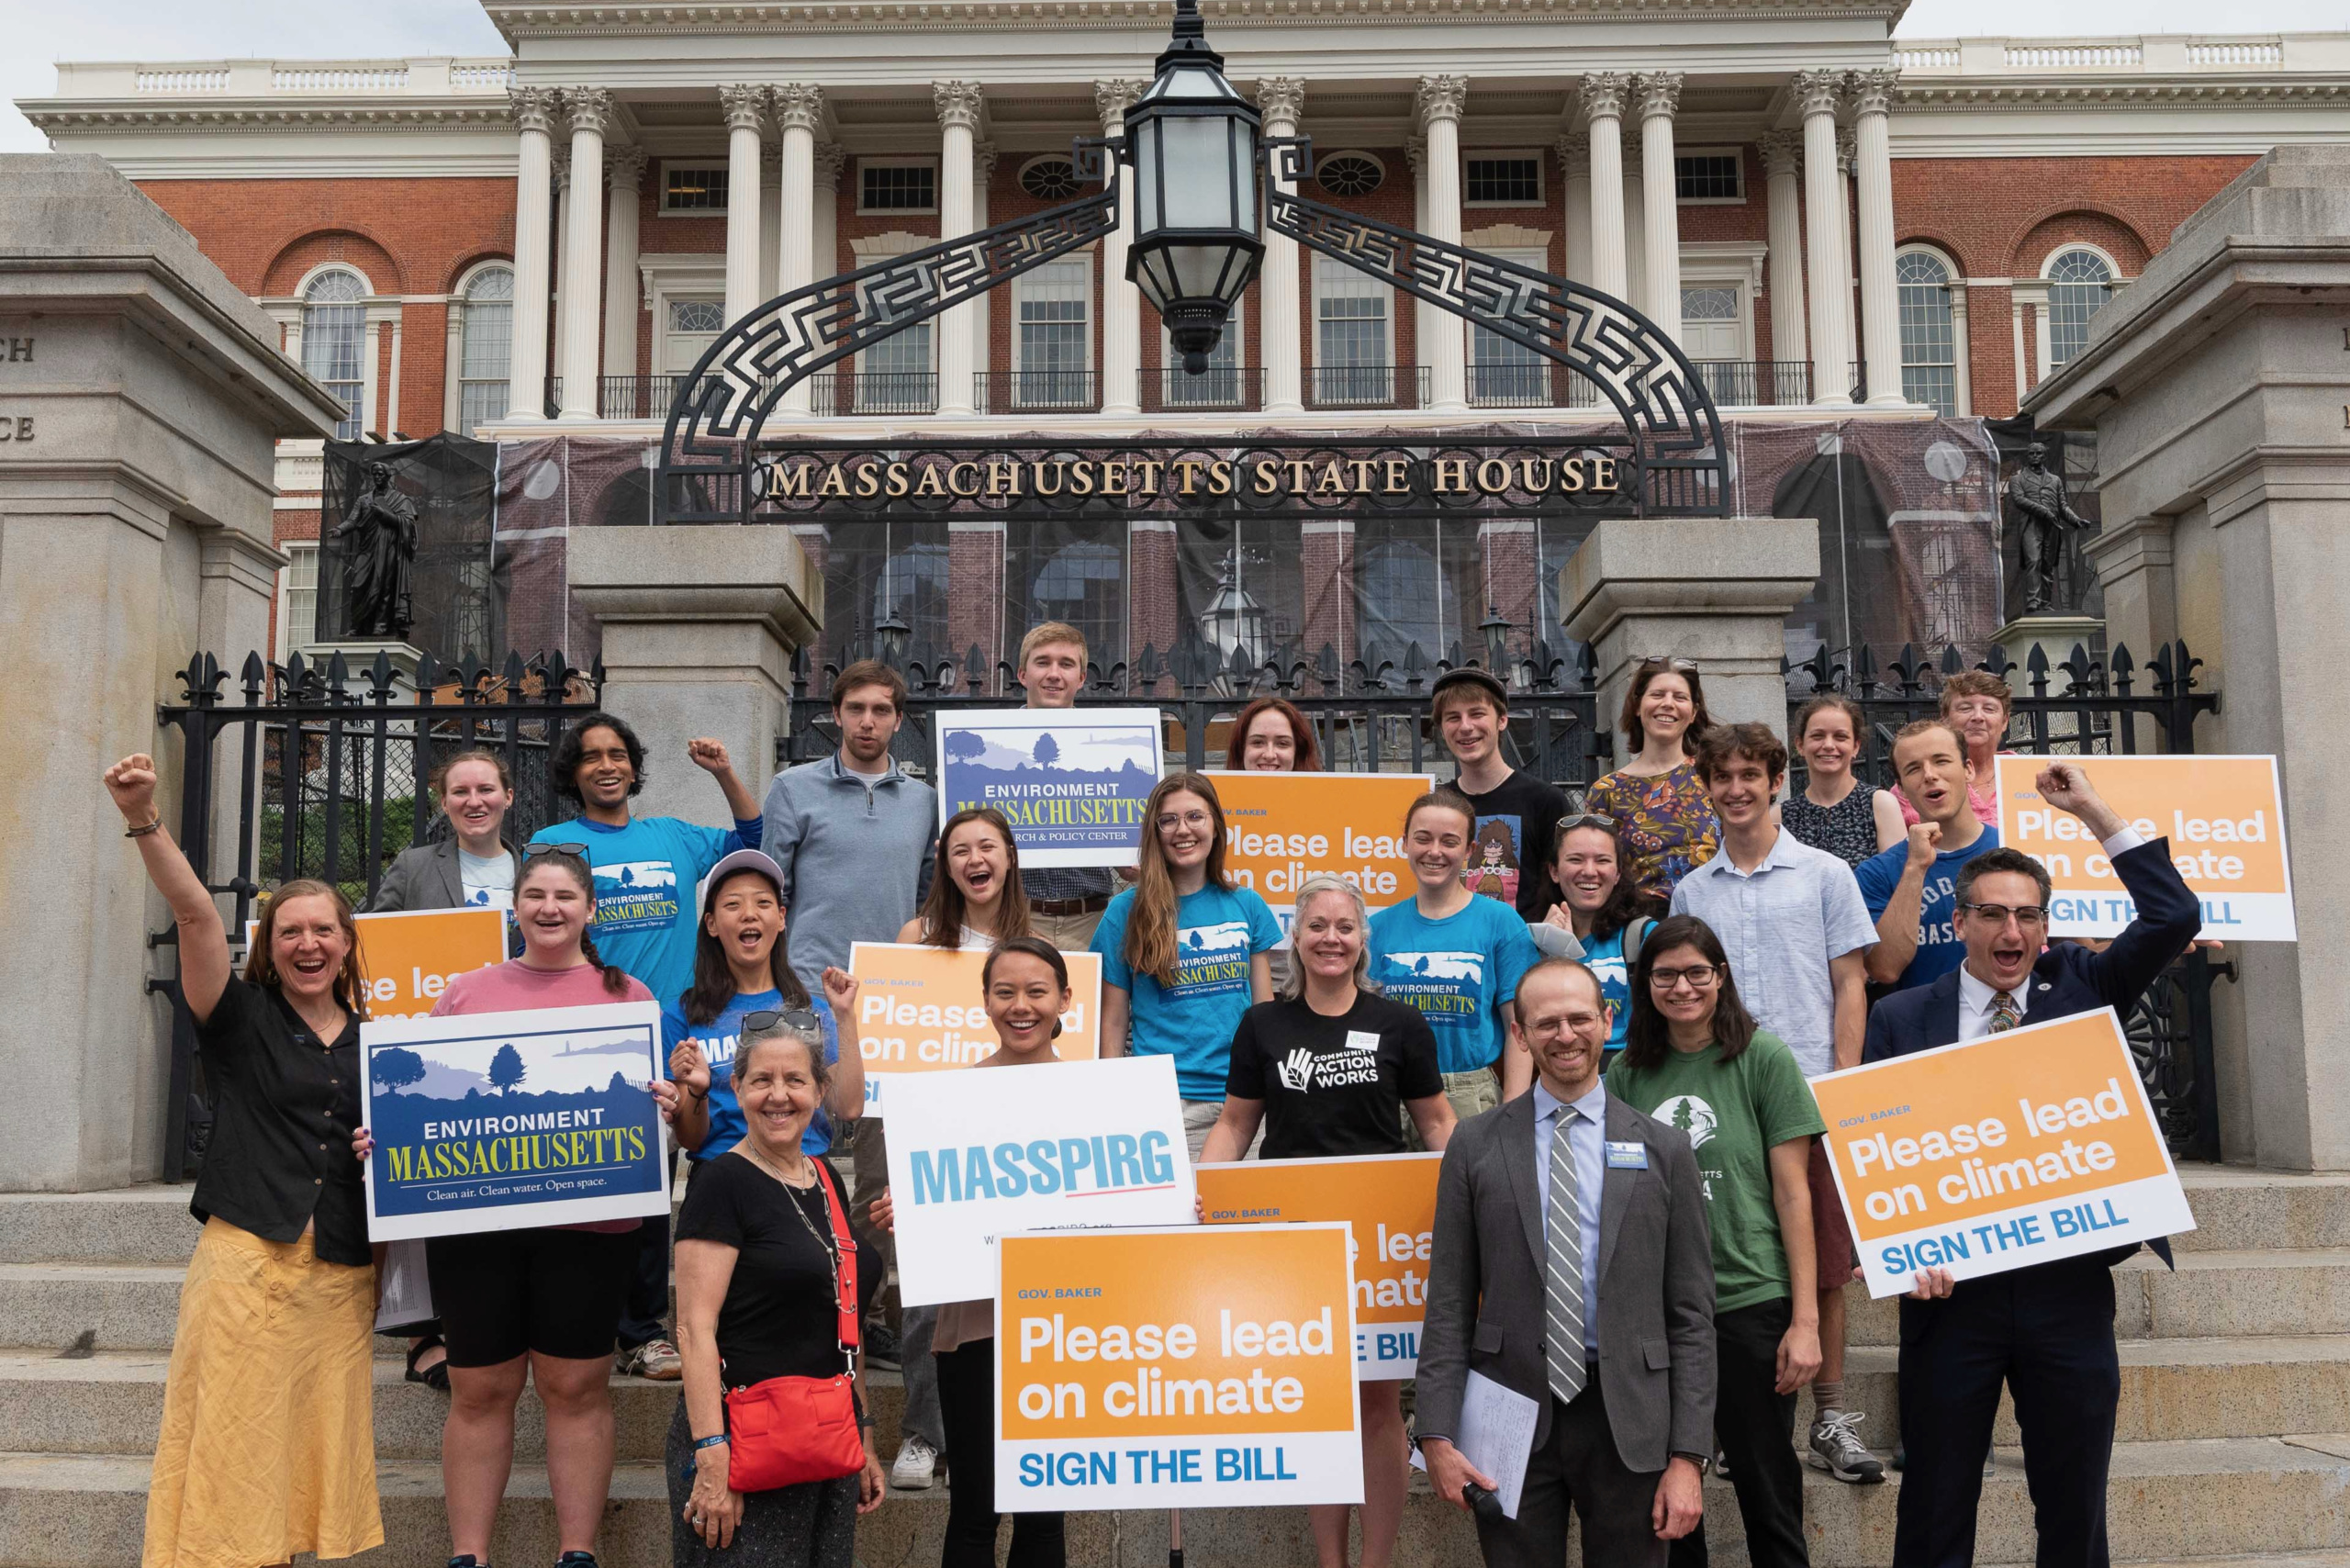 activists rallying for climate legislation in front of the Massachusetts State House